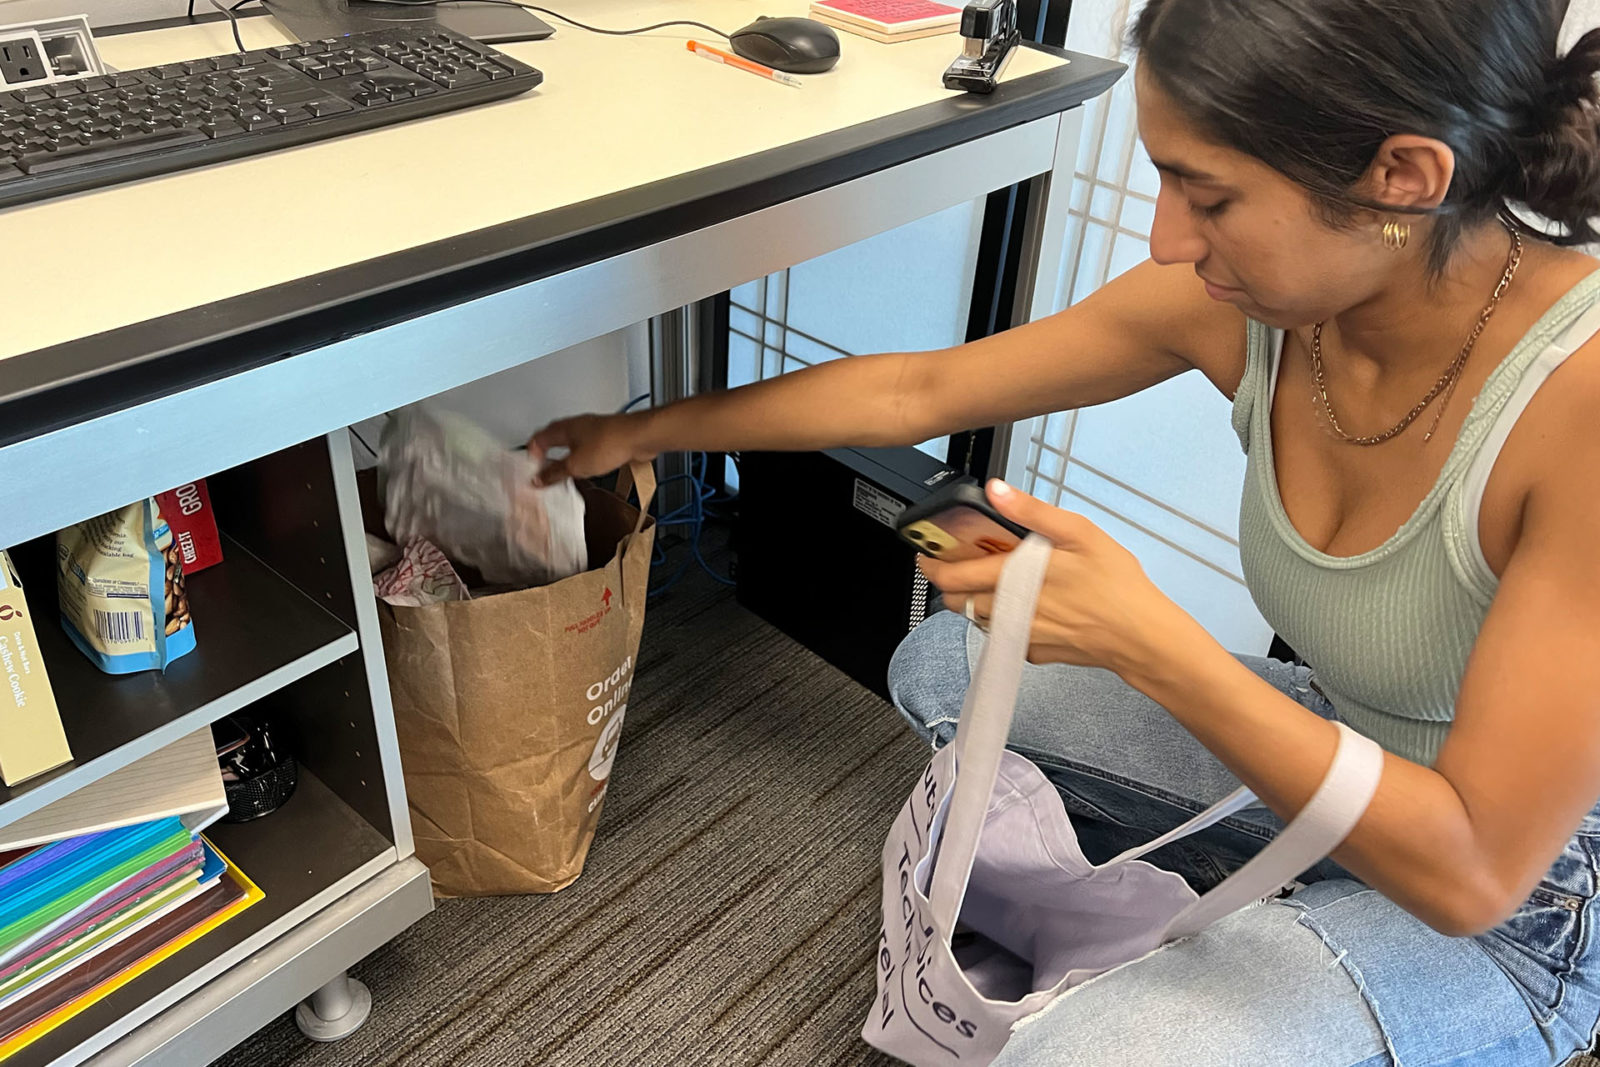 A photo of a person crouching under a desk putting something in a bag